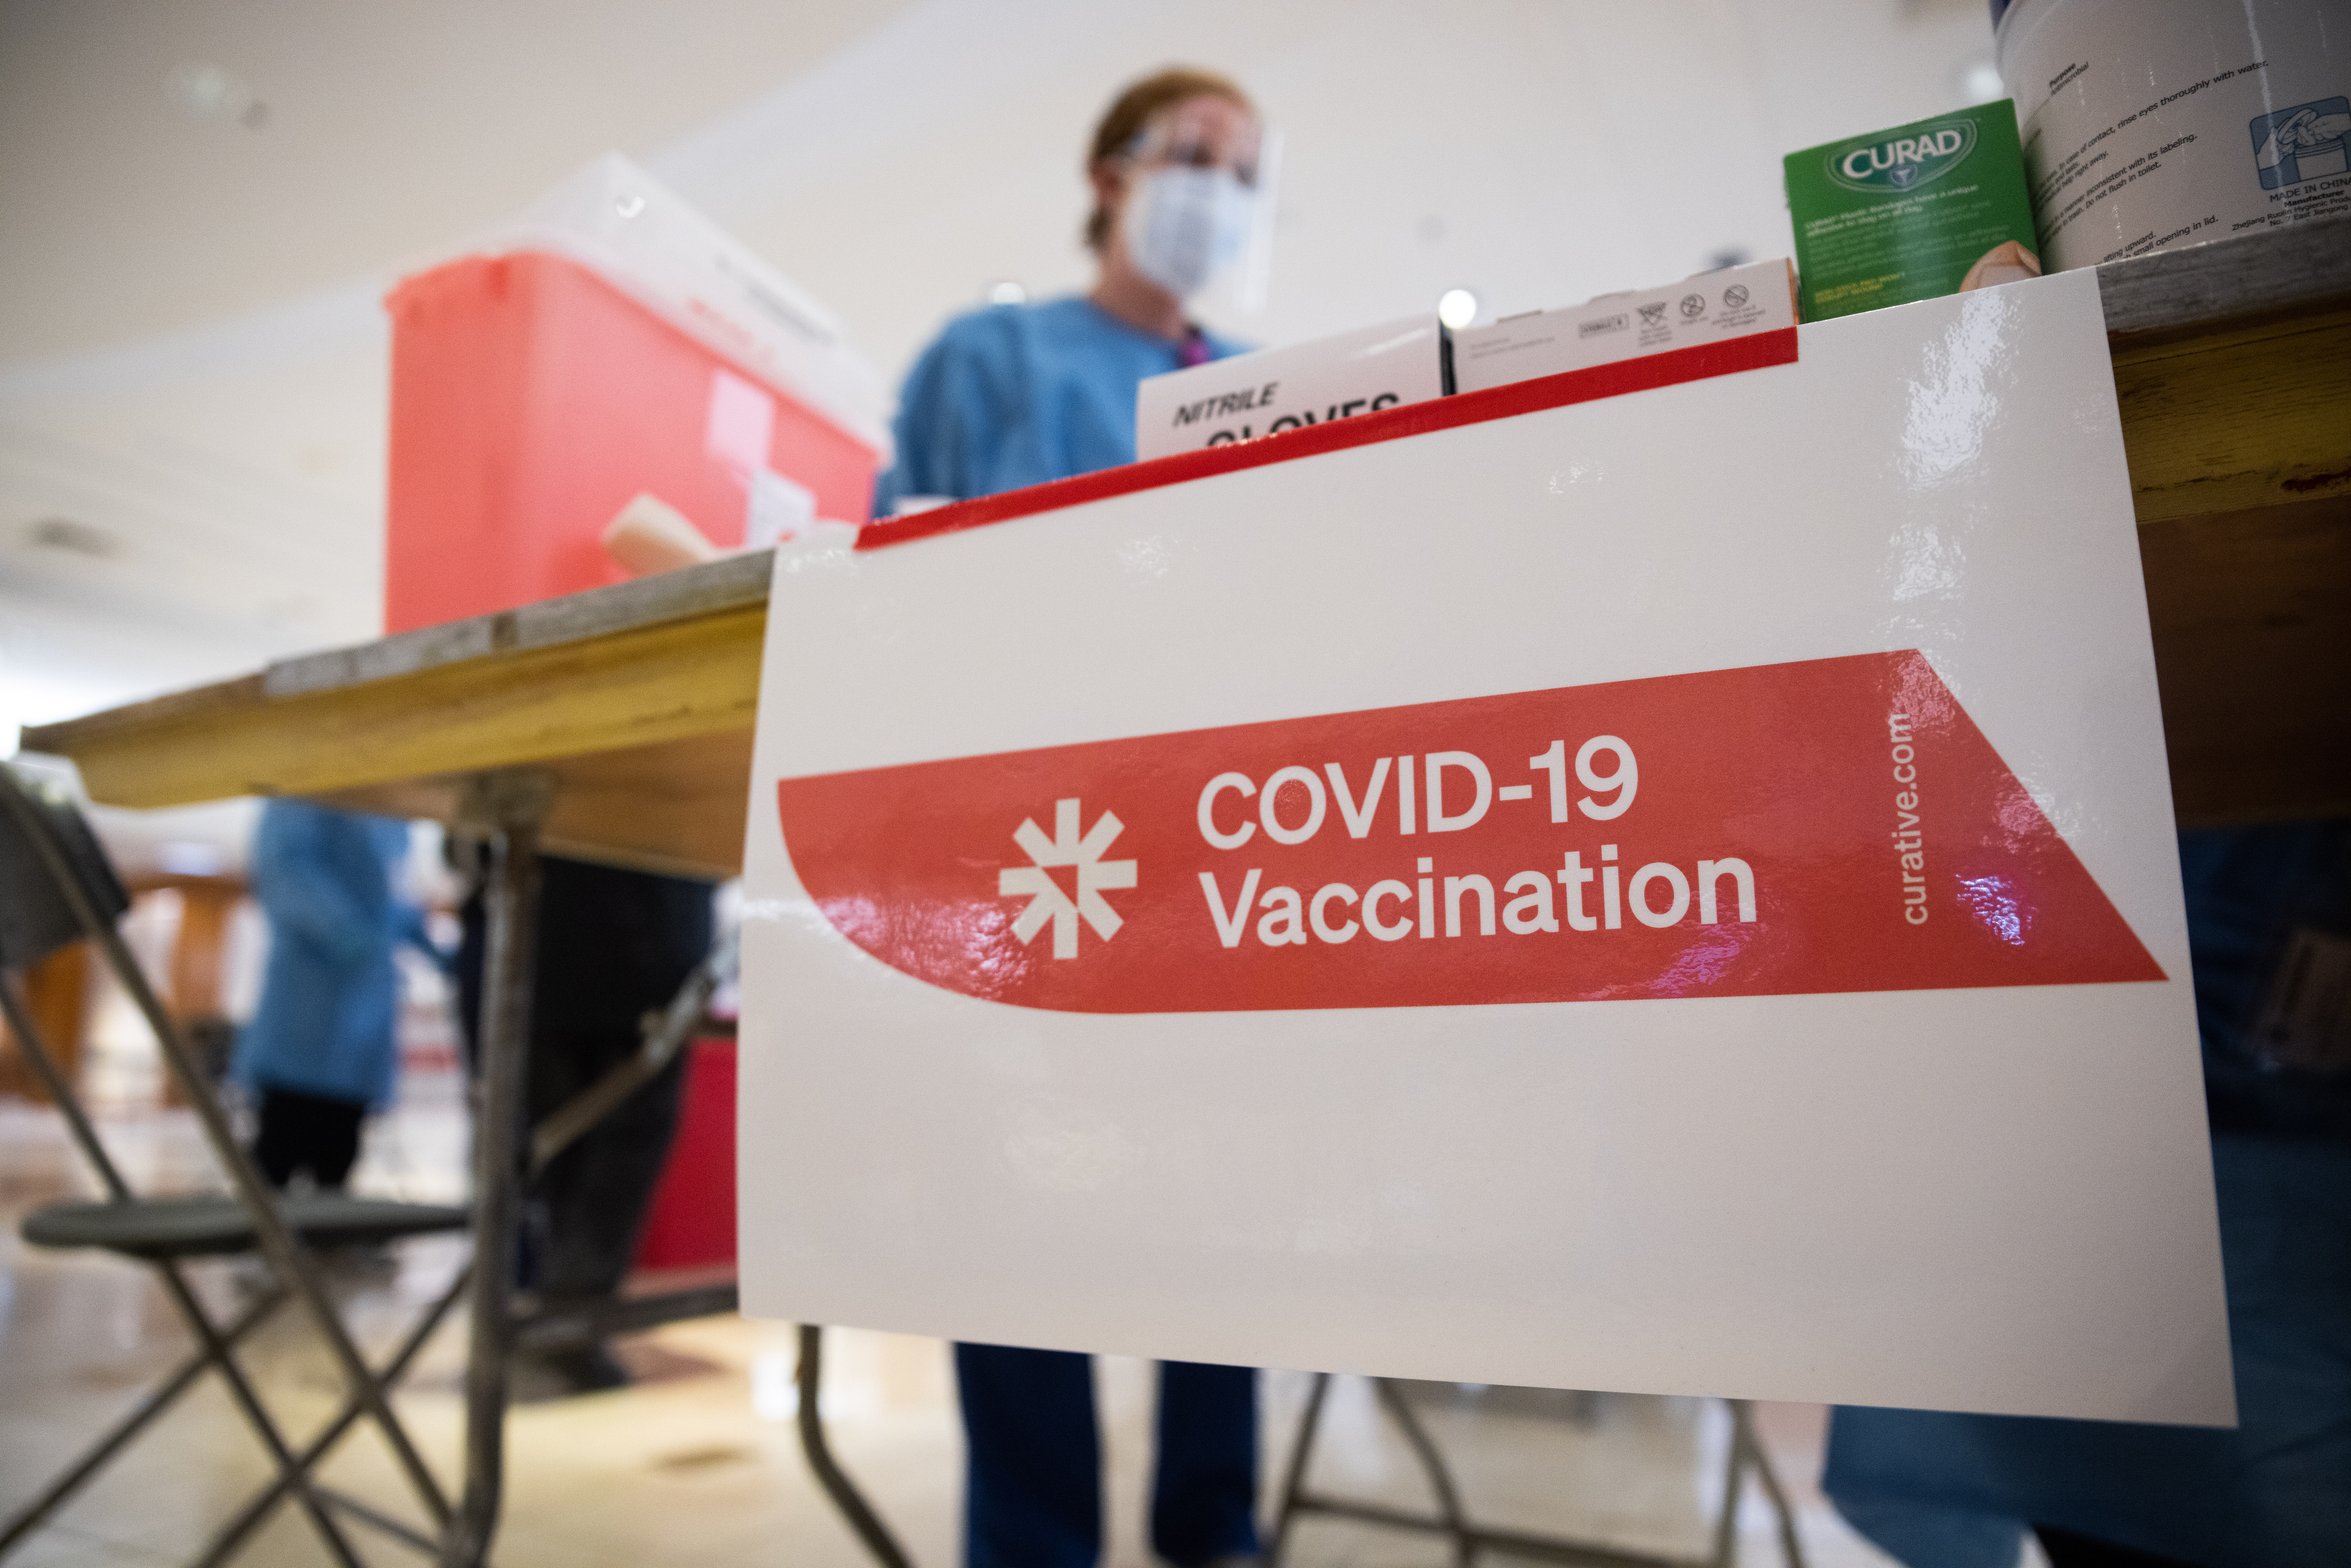 Cic Health Curative And Labcorp Have Cost Massachusetts More Than 10 Million To Run Covid Vaccination Sites Since January - Masslivecom